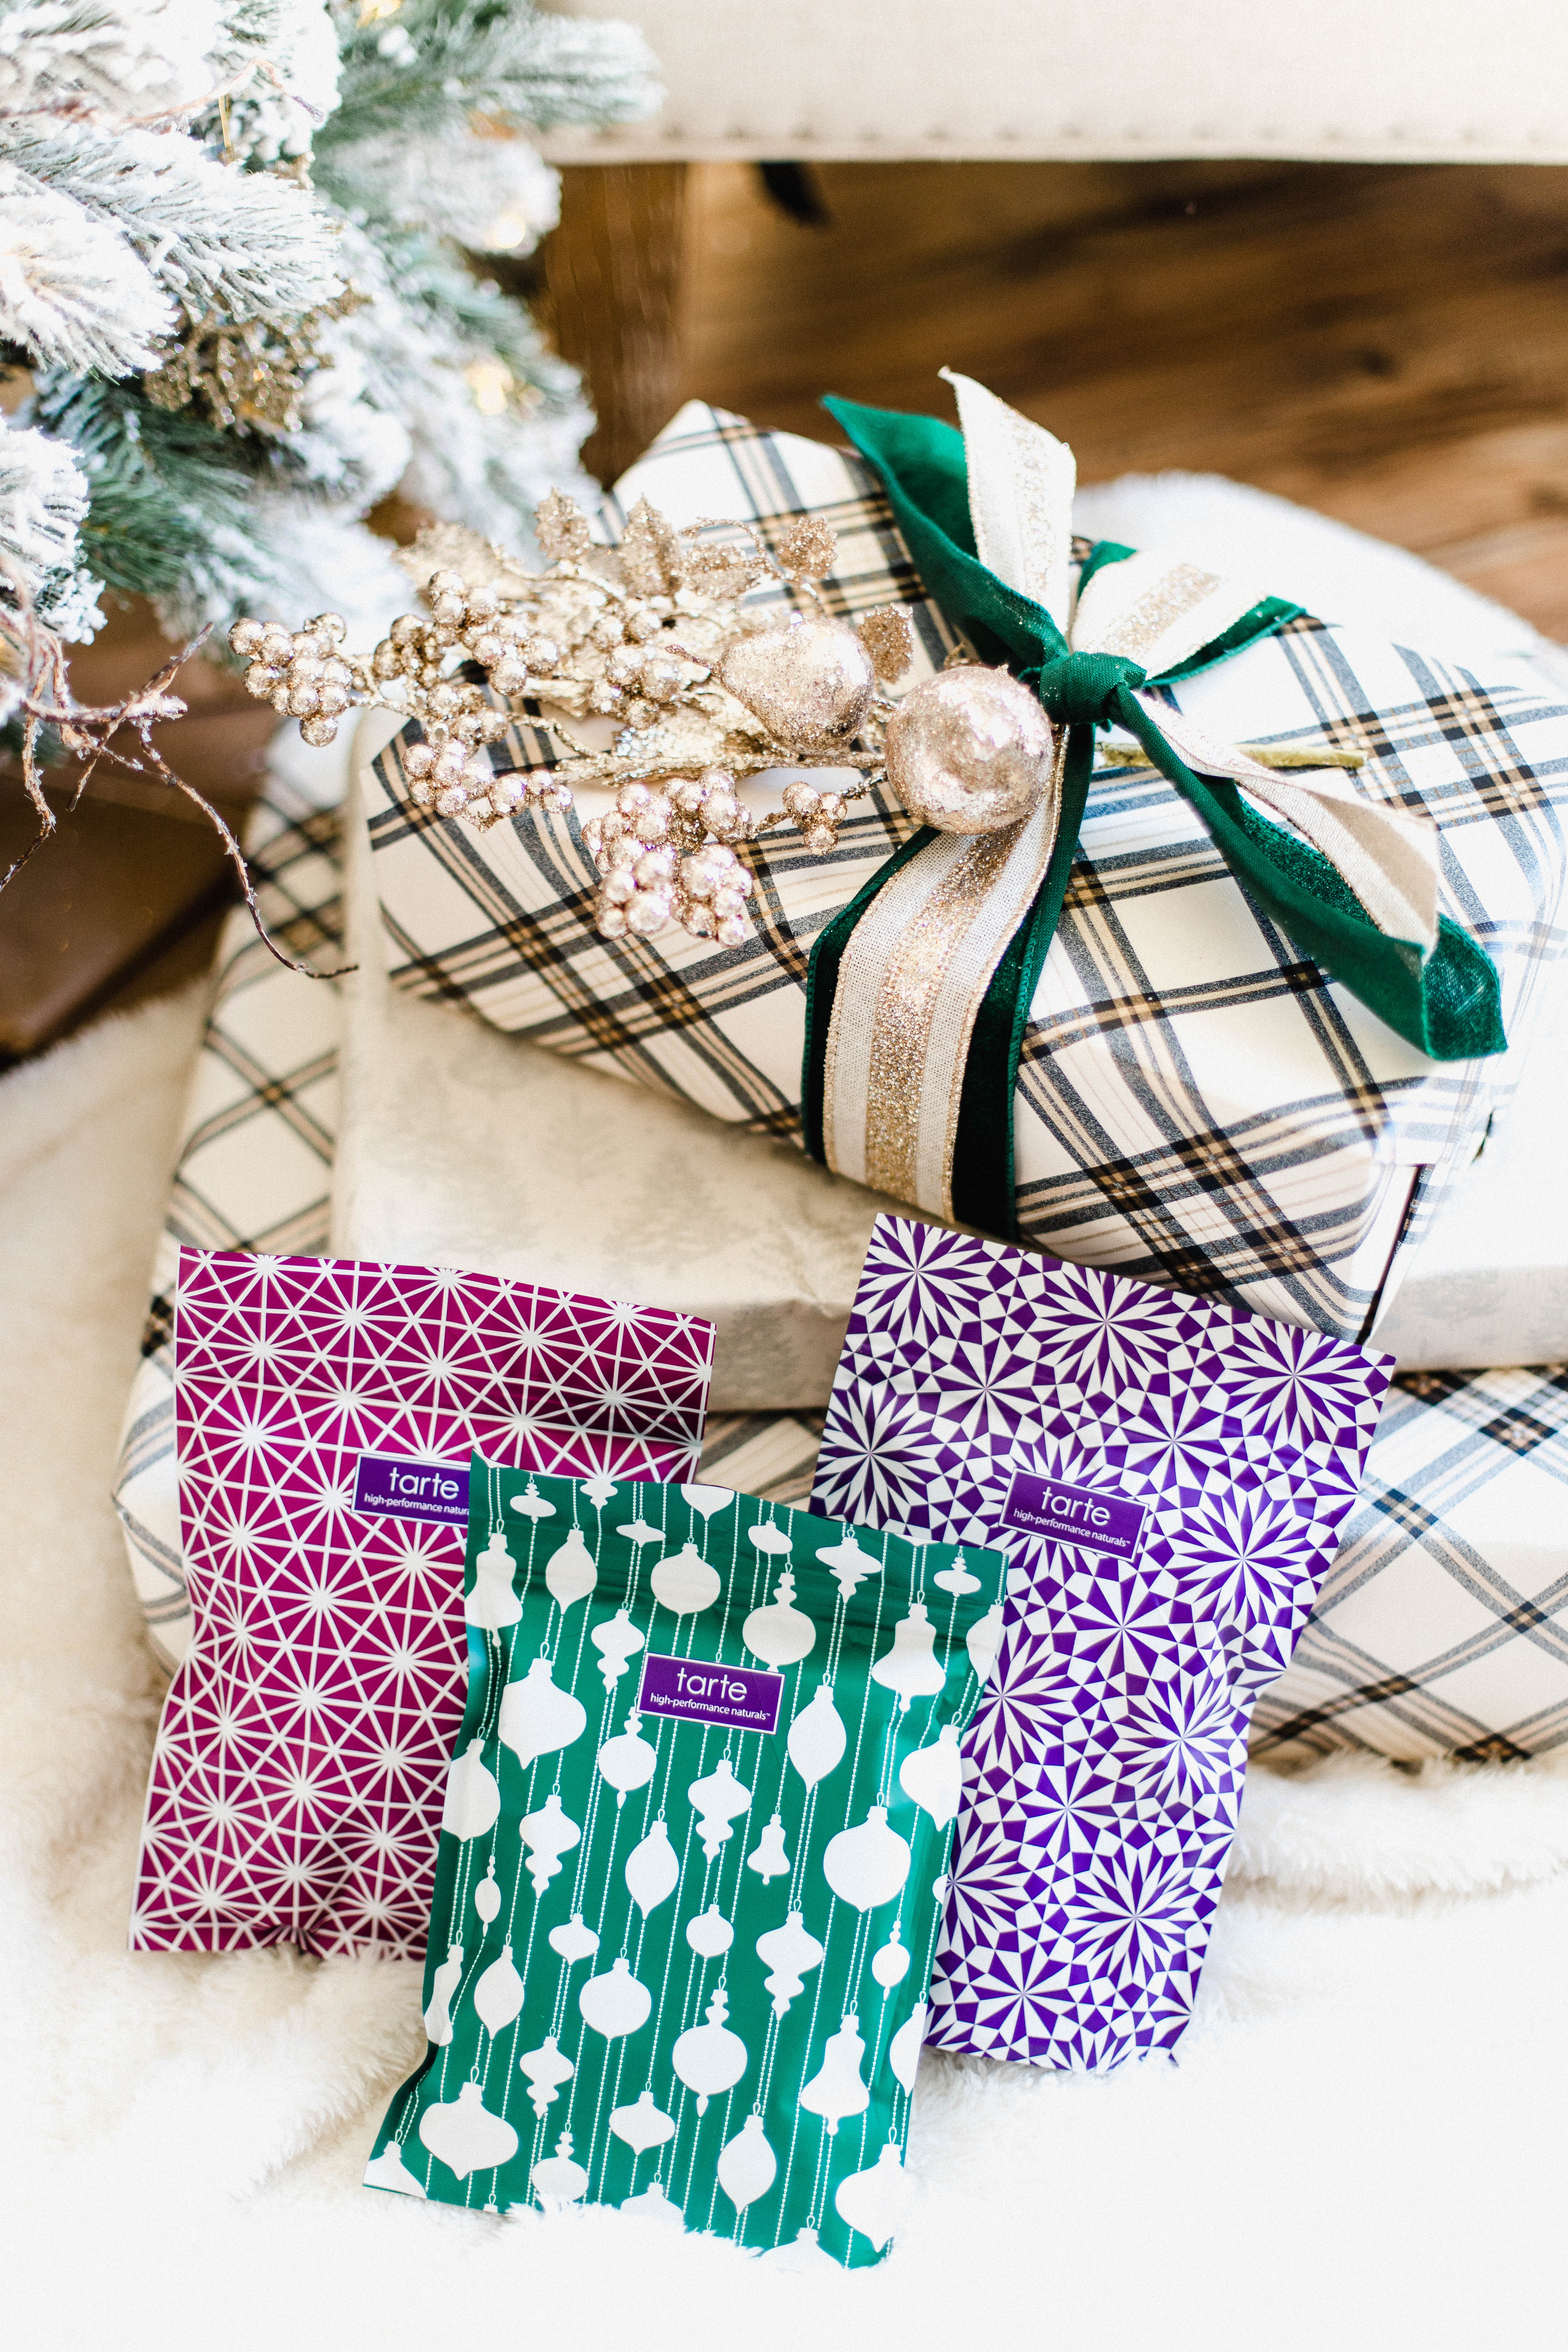 Connecticut life and style blogger Lauren McBride shares last minute beauty stocking stuffer ideas featuring items from QVC.